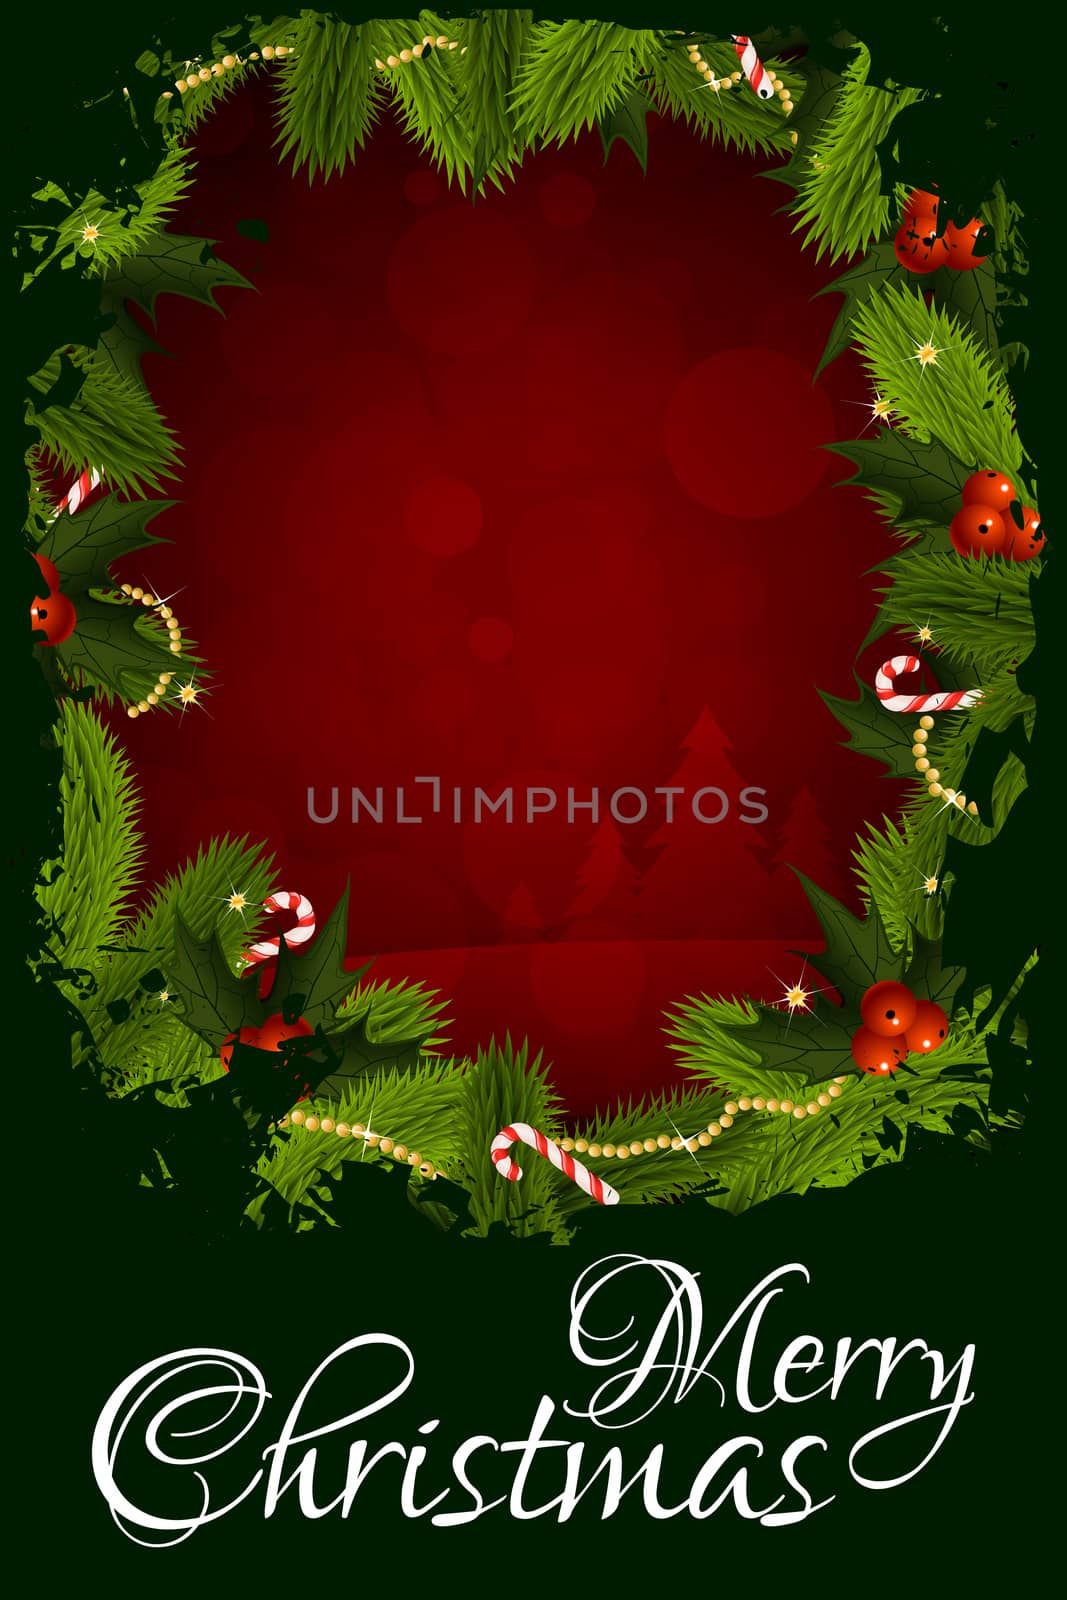 Merry Christmas Greeting Card by WaD